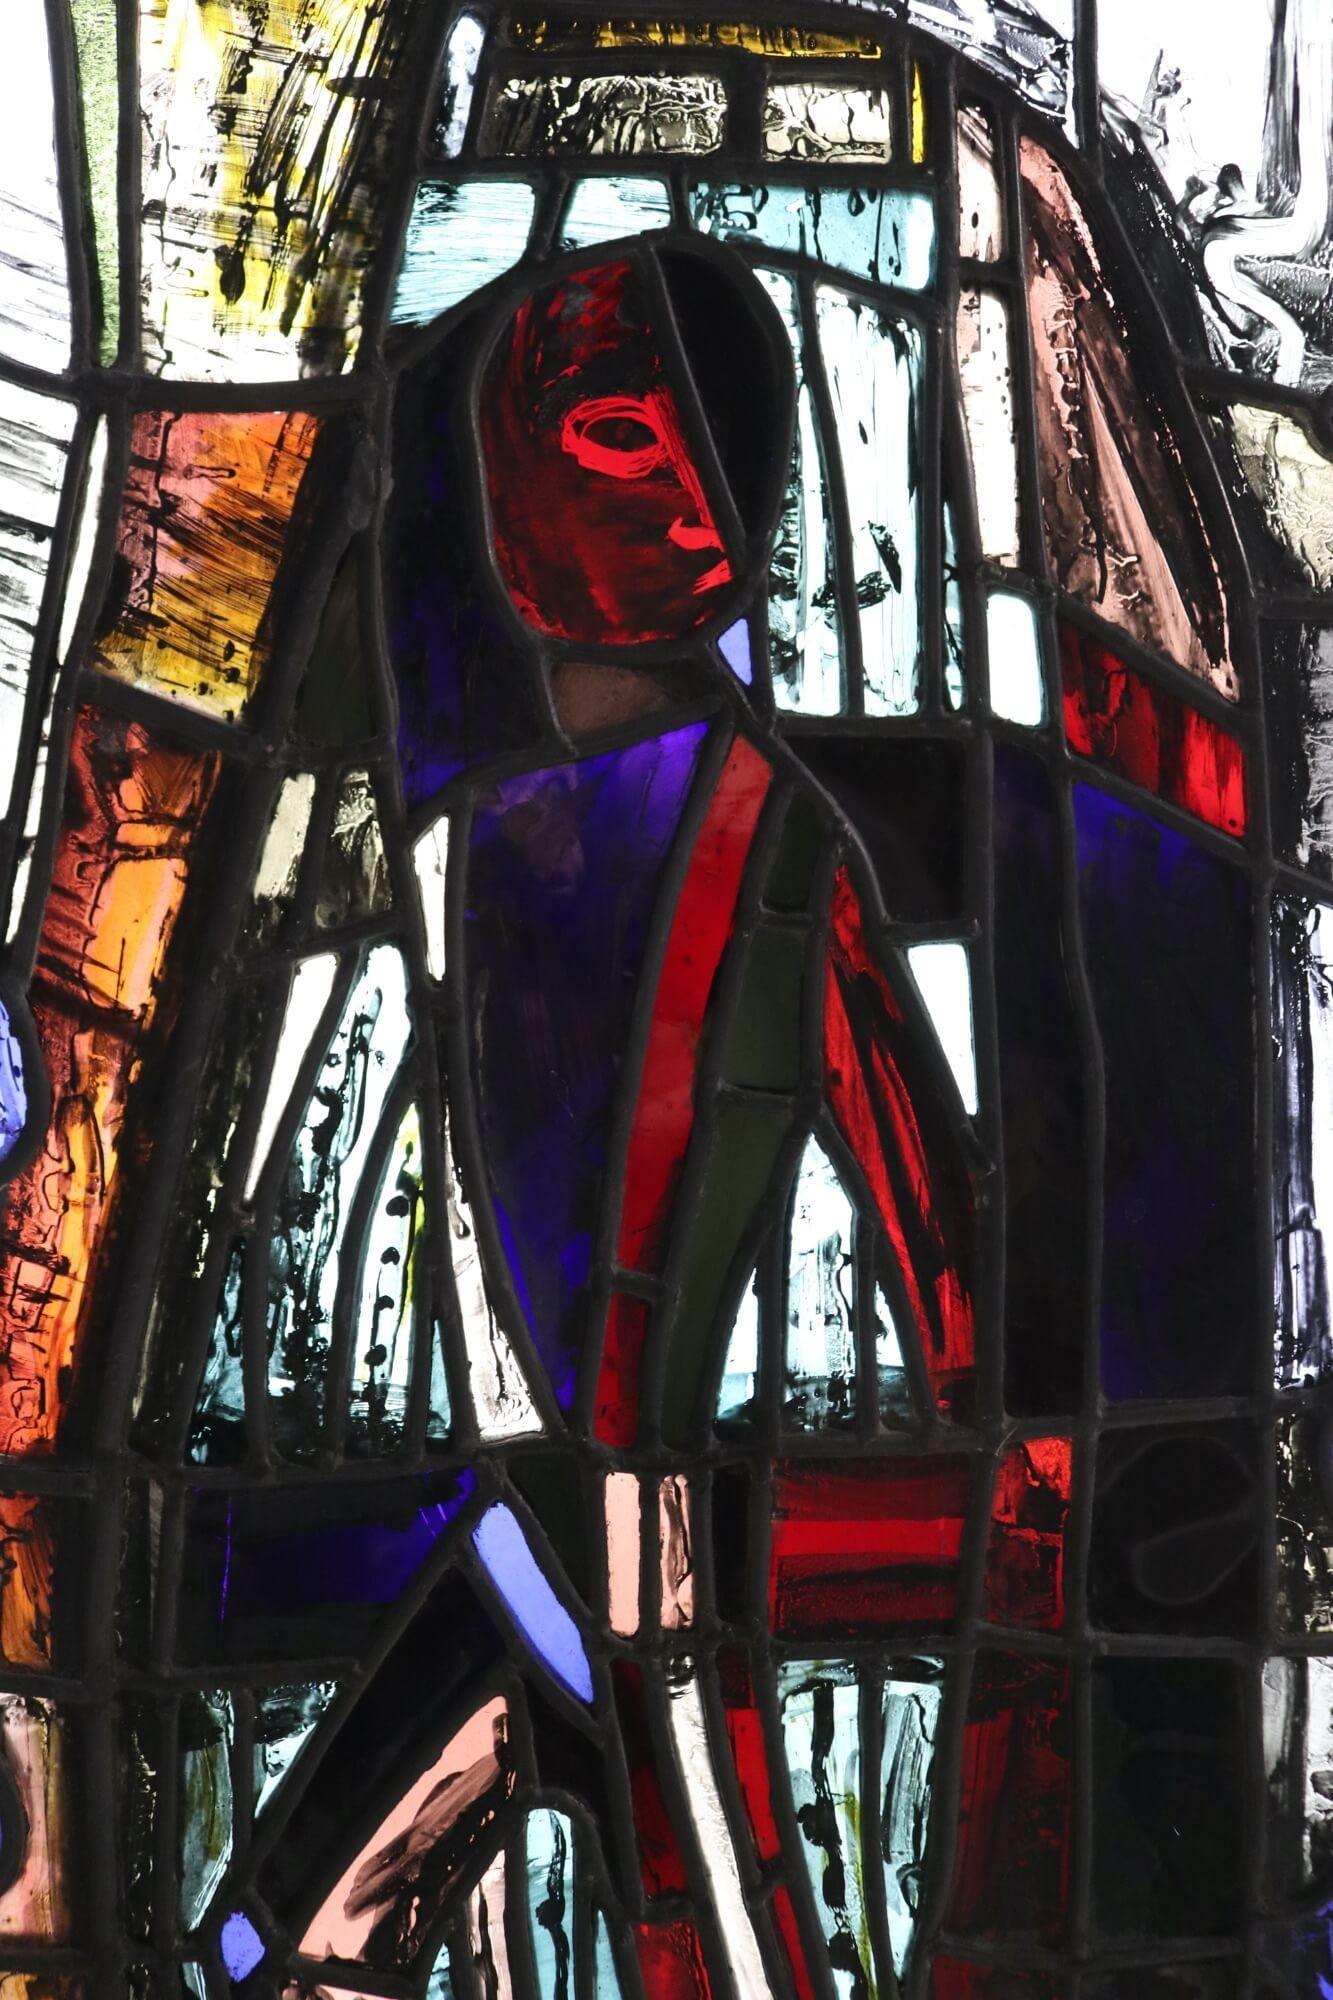 A figurative stained glass window from the studio of Patrick Reyntiens (1925-2021). Attributed to the artist, this stained glass panel depicts an abstract design with hand painted details around what appears to be a central figure. It is one of